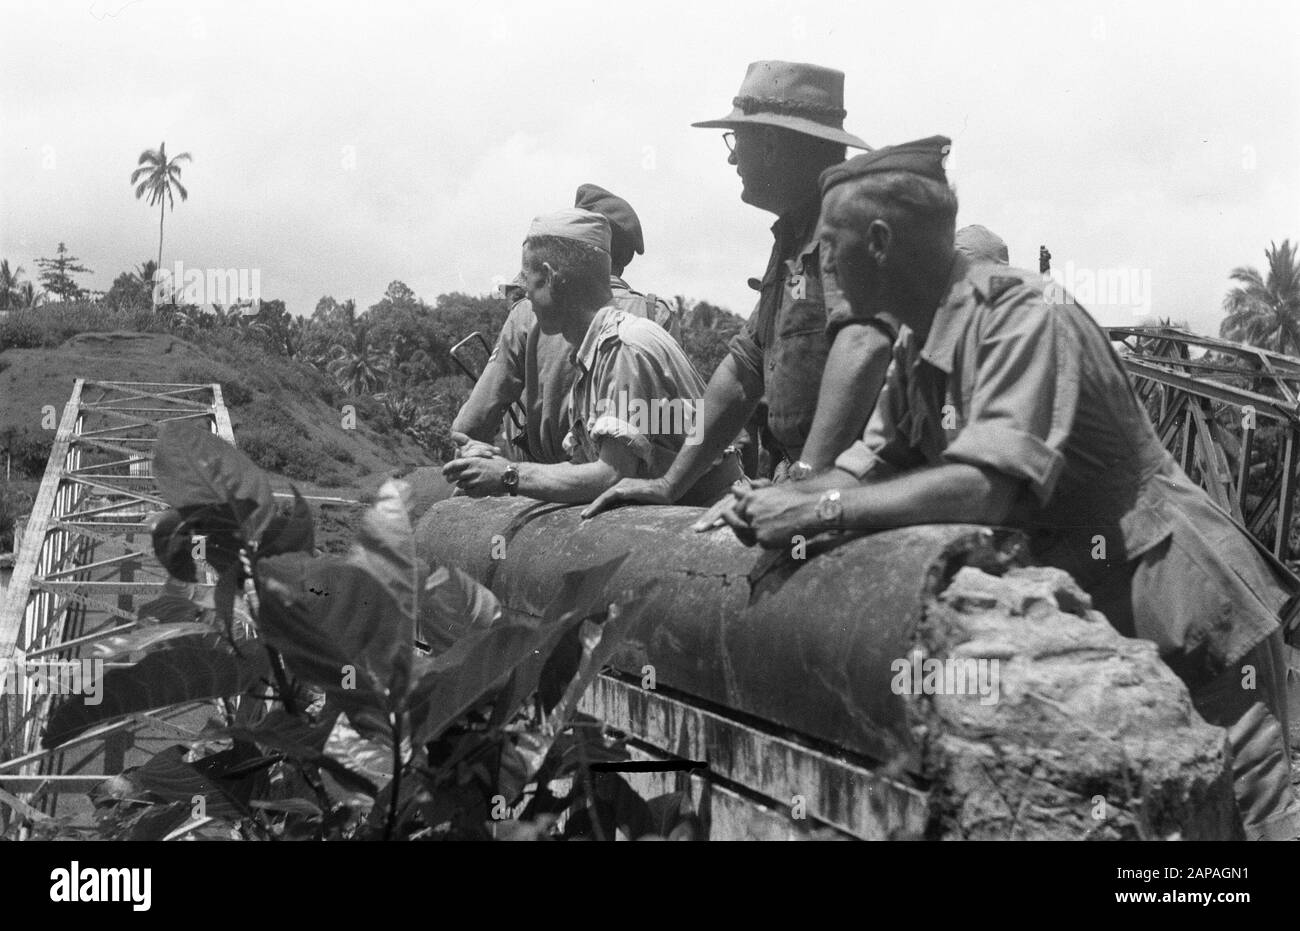 Lahat Description: The Territorial also Troop Commander of South Sumatra, Colonel F. Mollinger (with bushhat) discusses with Lieutenant Colonel H.G.M. Bouwman (left) the situation at the bridges destroyed by Republicans for Tebing Tinggi Date: 19 December 1948 Location: Indonesia, Dutch East Indies, Sumatra, Tebing Tinggi Stock Photo